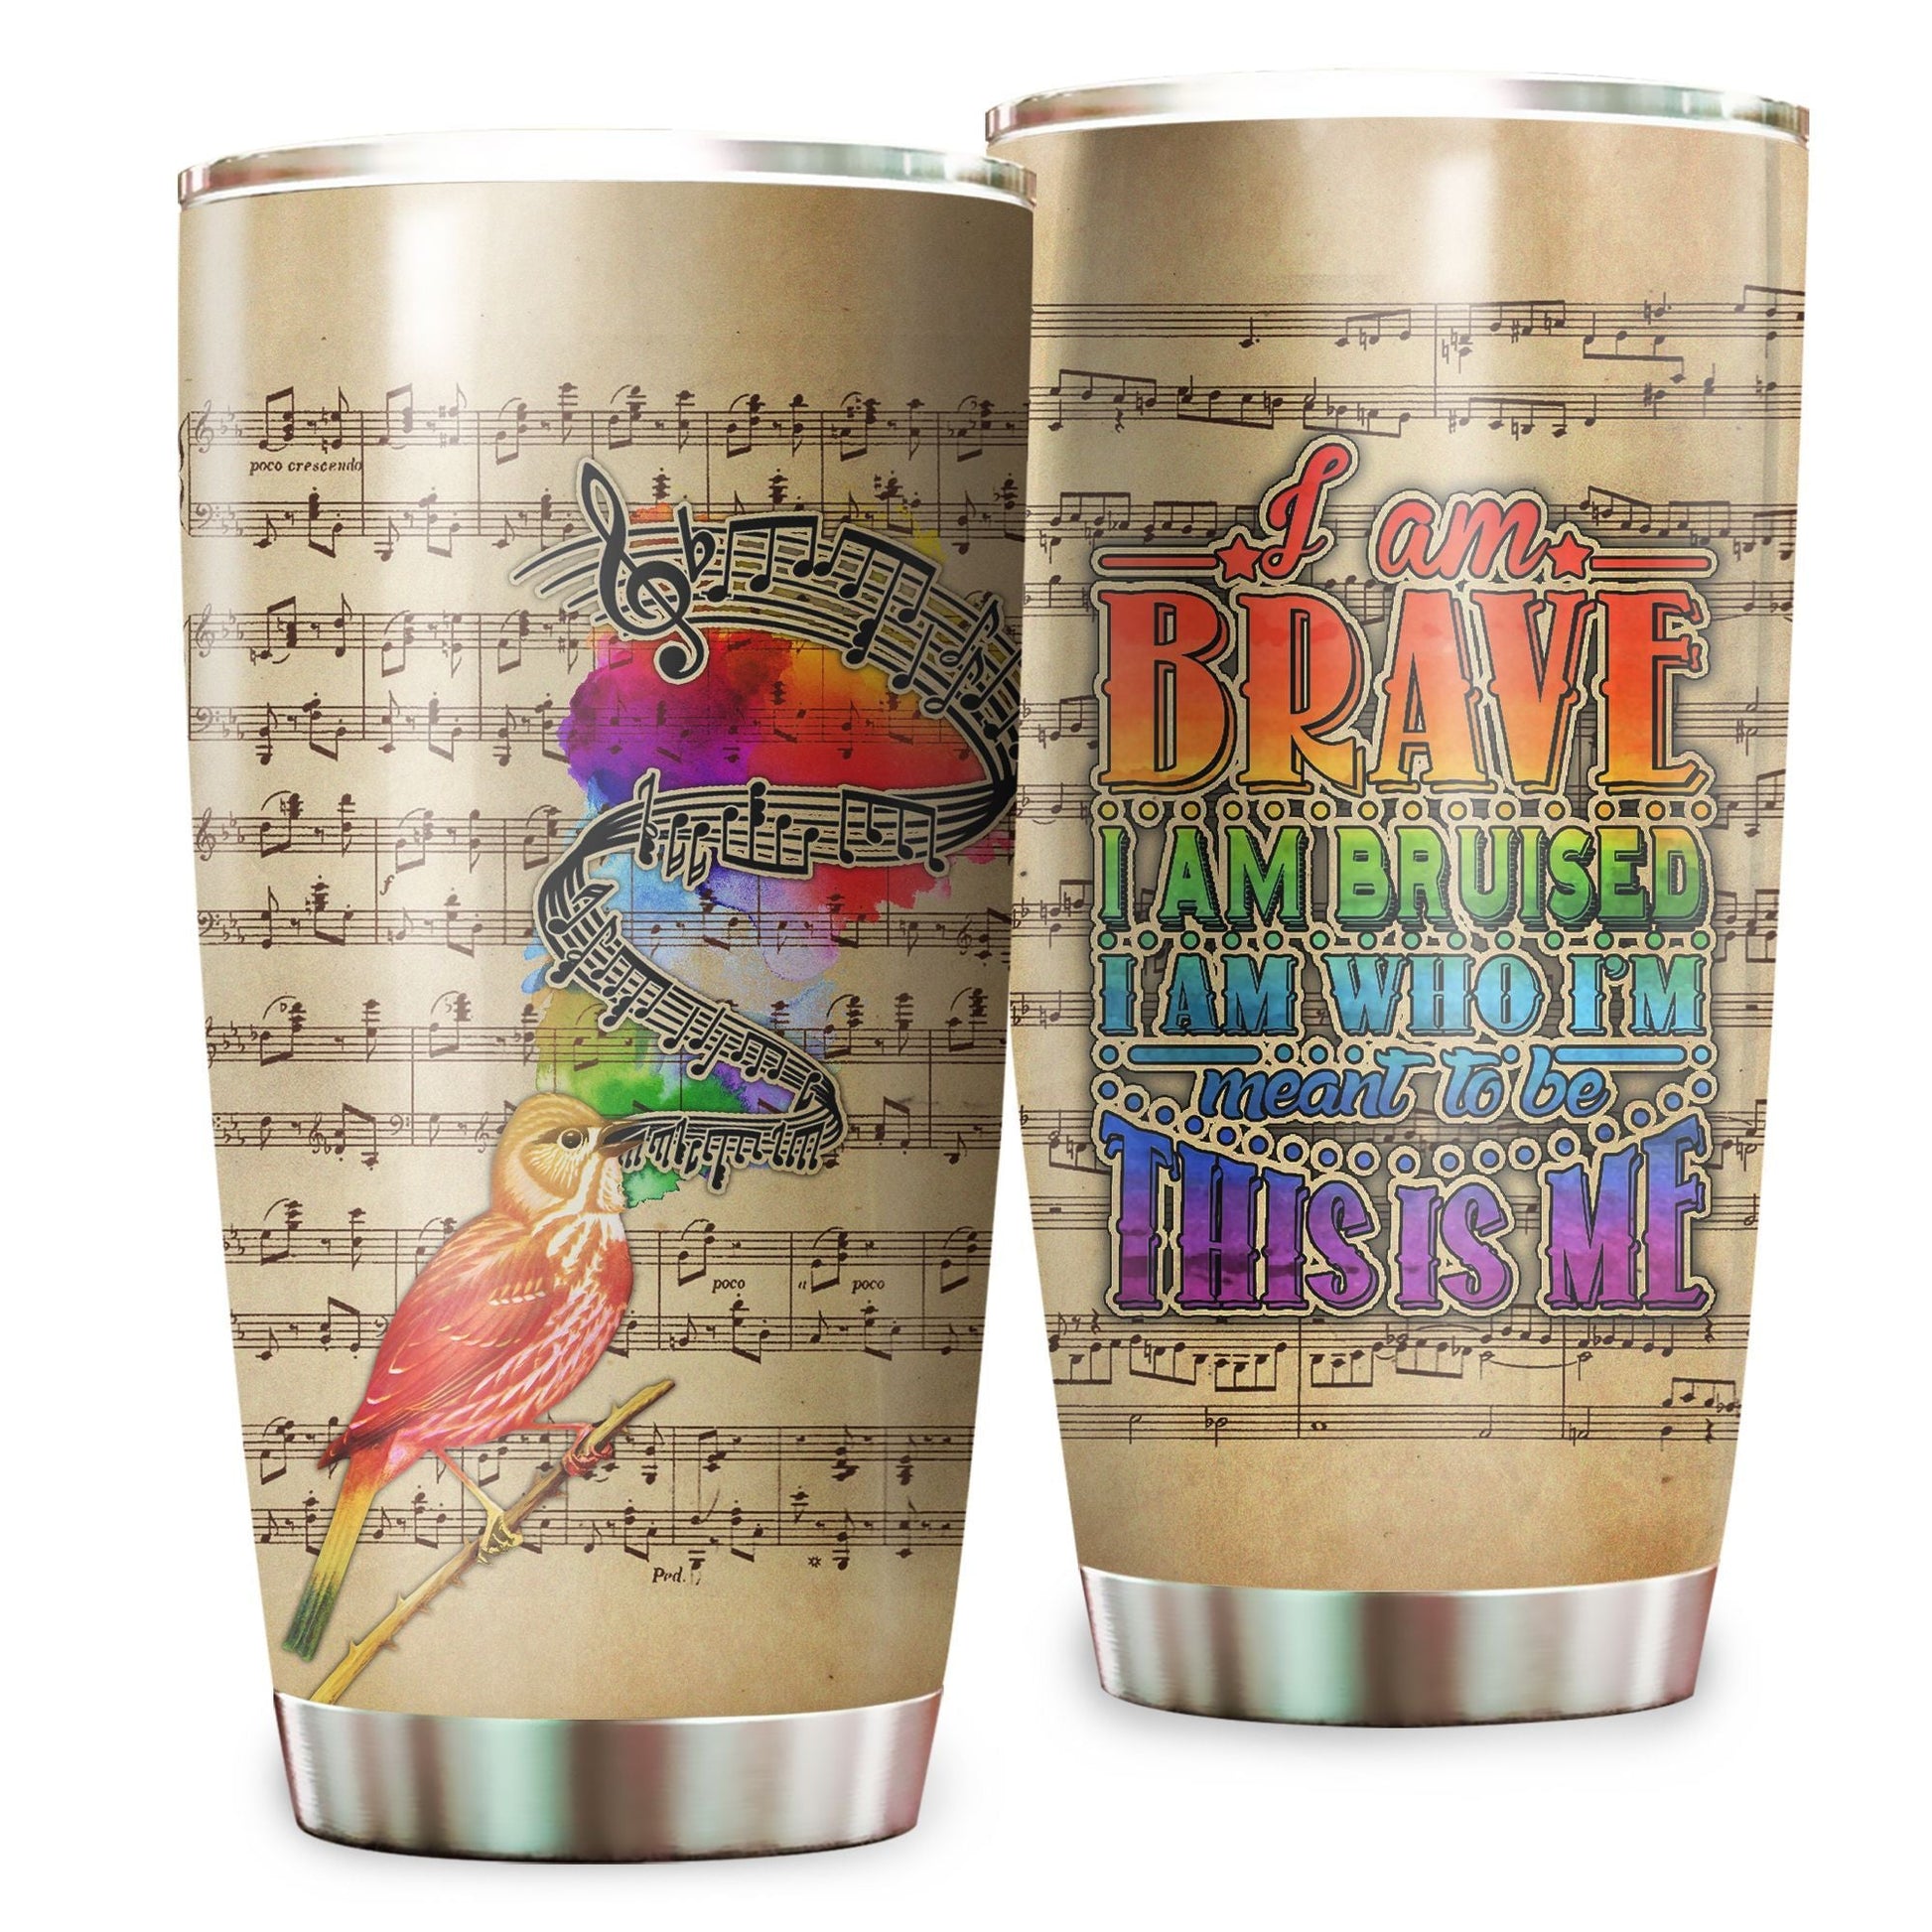 Unifinz LGBT Tumbler Cup 20 oz Bird I Am Brave I Am Bruised This Is Me Tumbler LGBT Travel Cup 2022